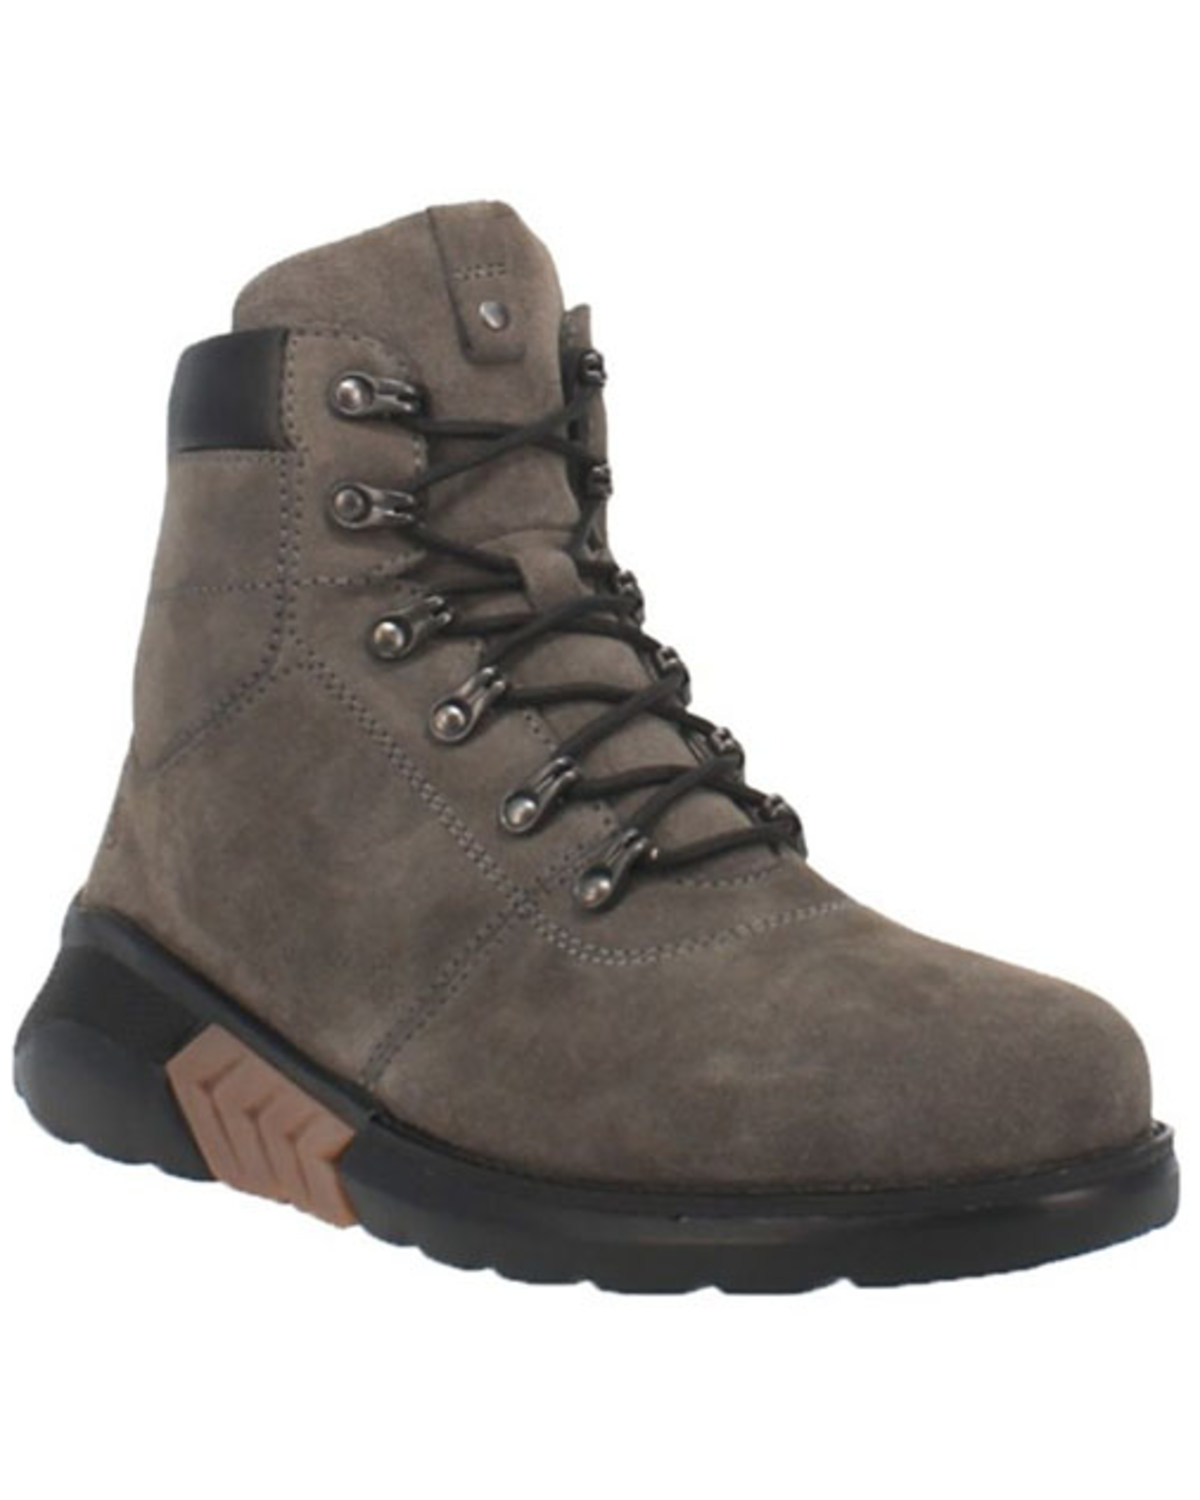 Dingo Men's Traffic Zone Lace-Up Boots - Round Toe